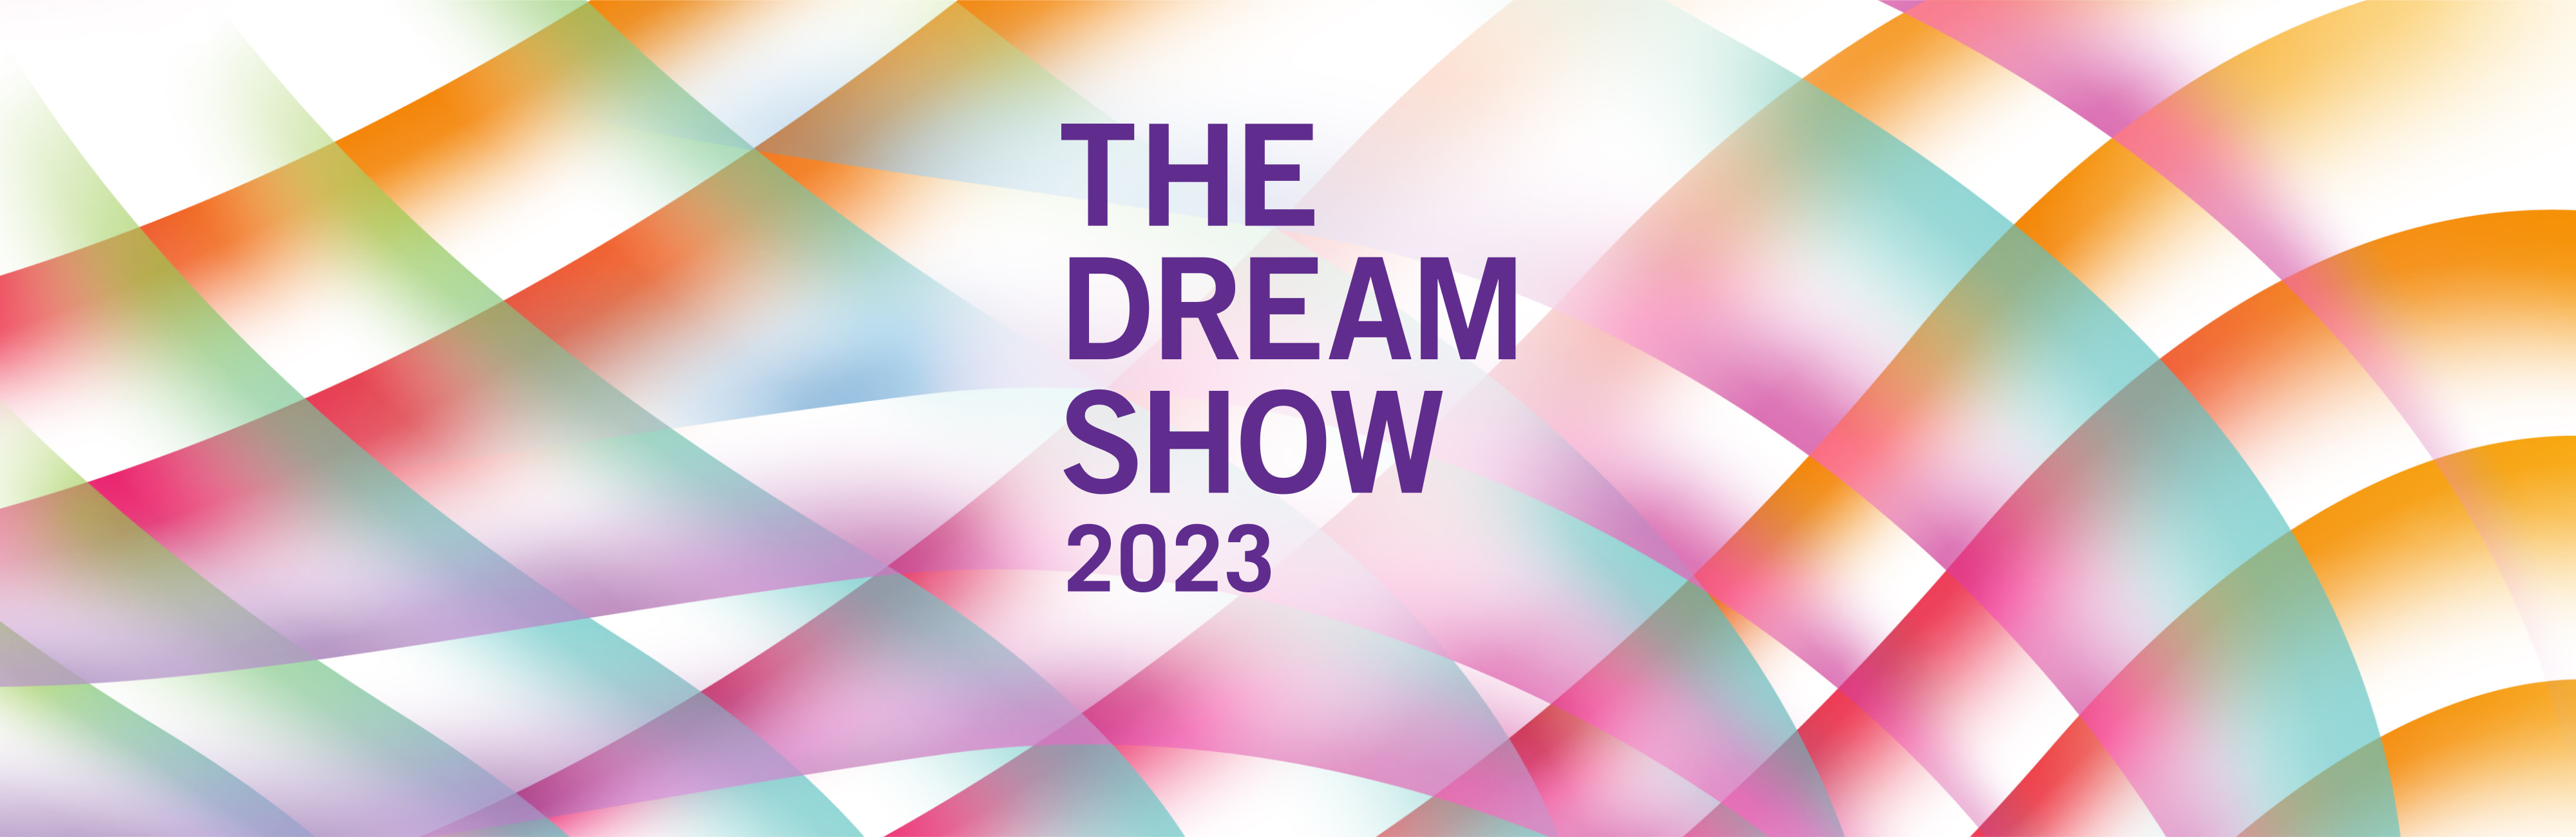 The Dream Show Become a Sponsor Banner with colorful waves